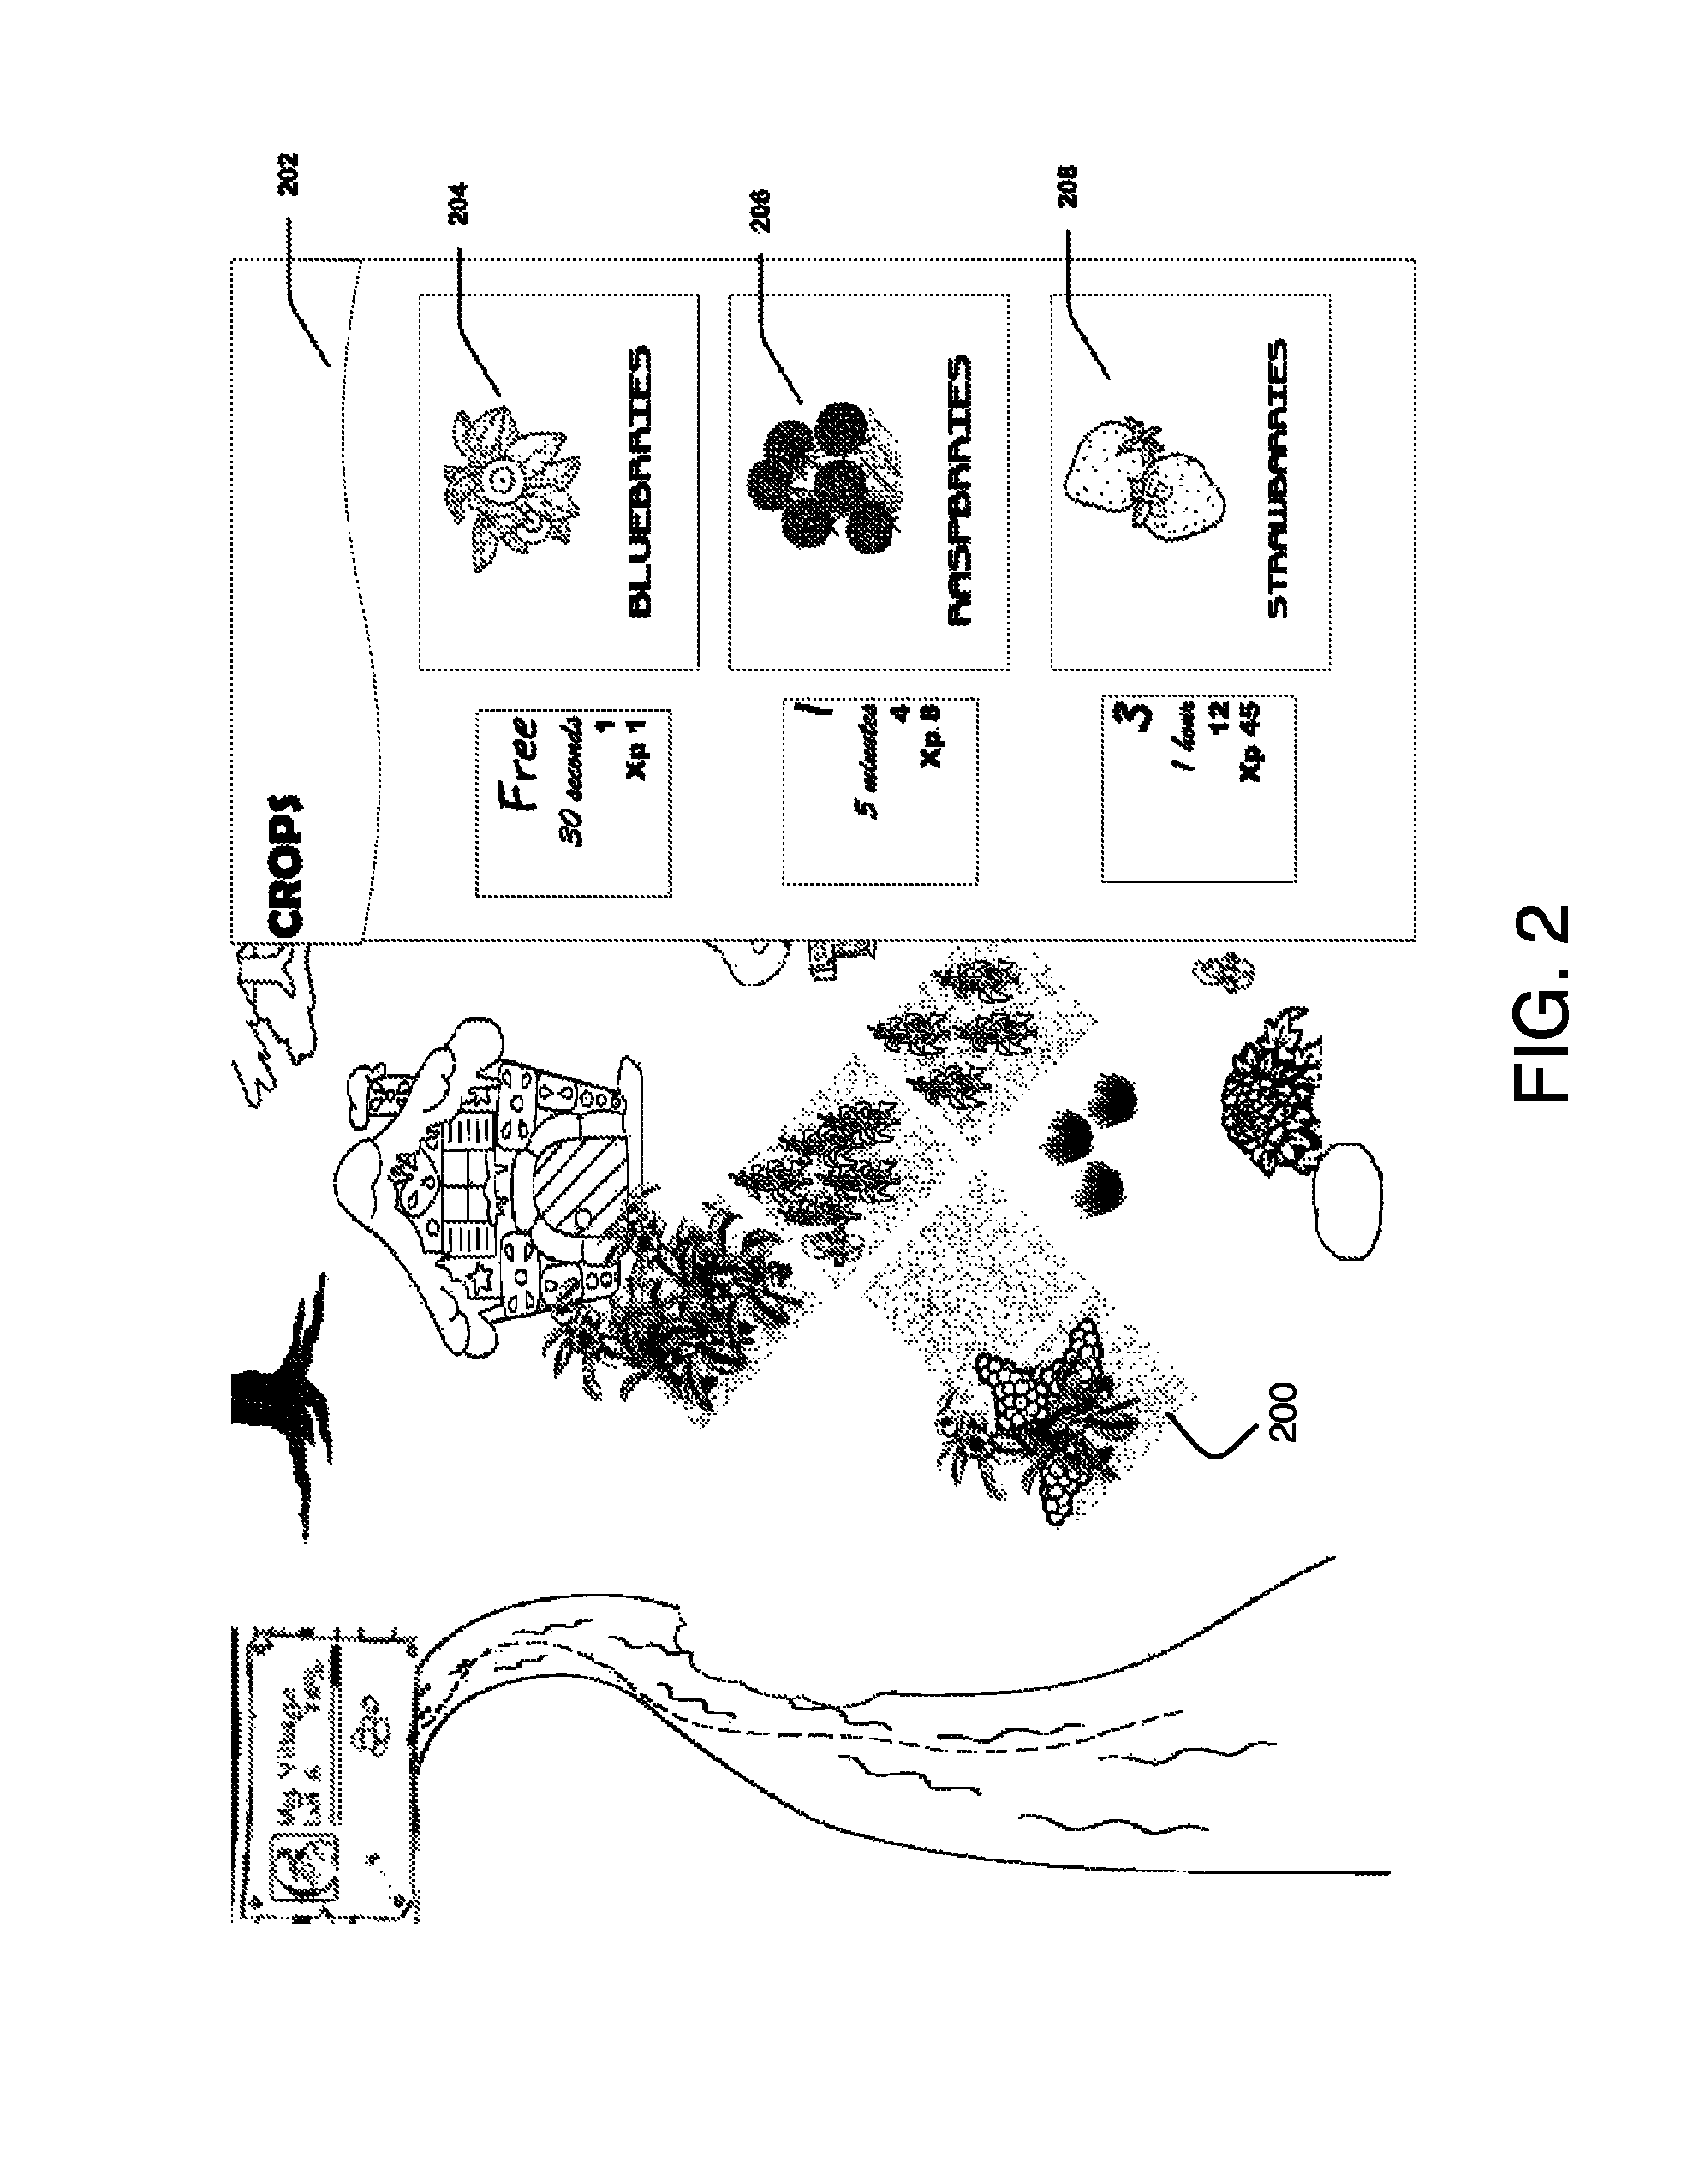 System, method and graphical user interface for controlling a game